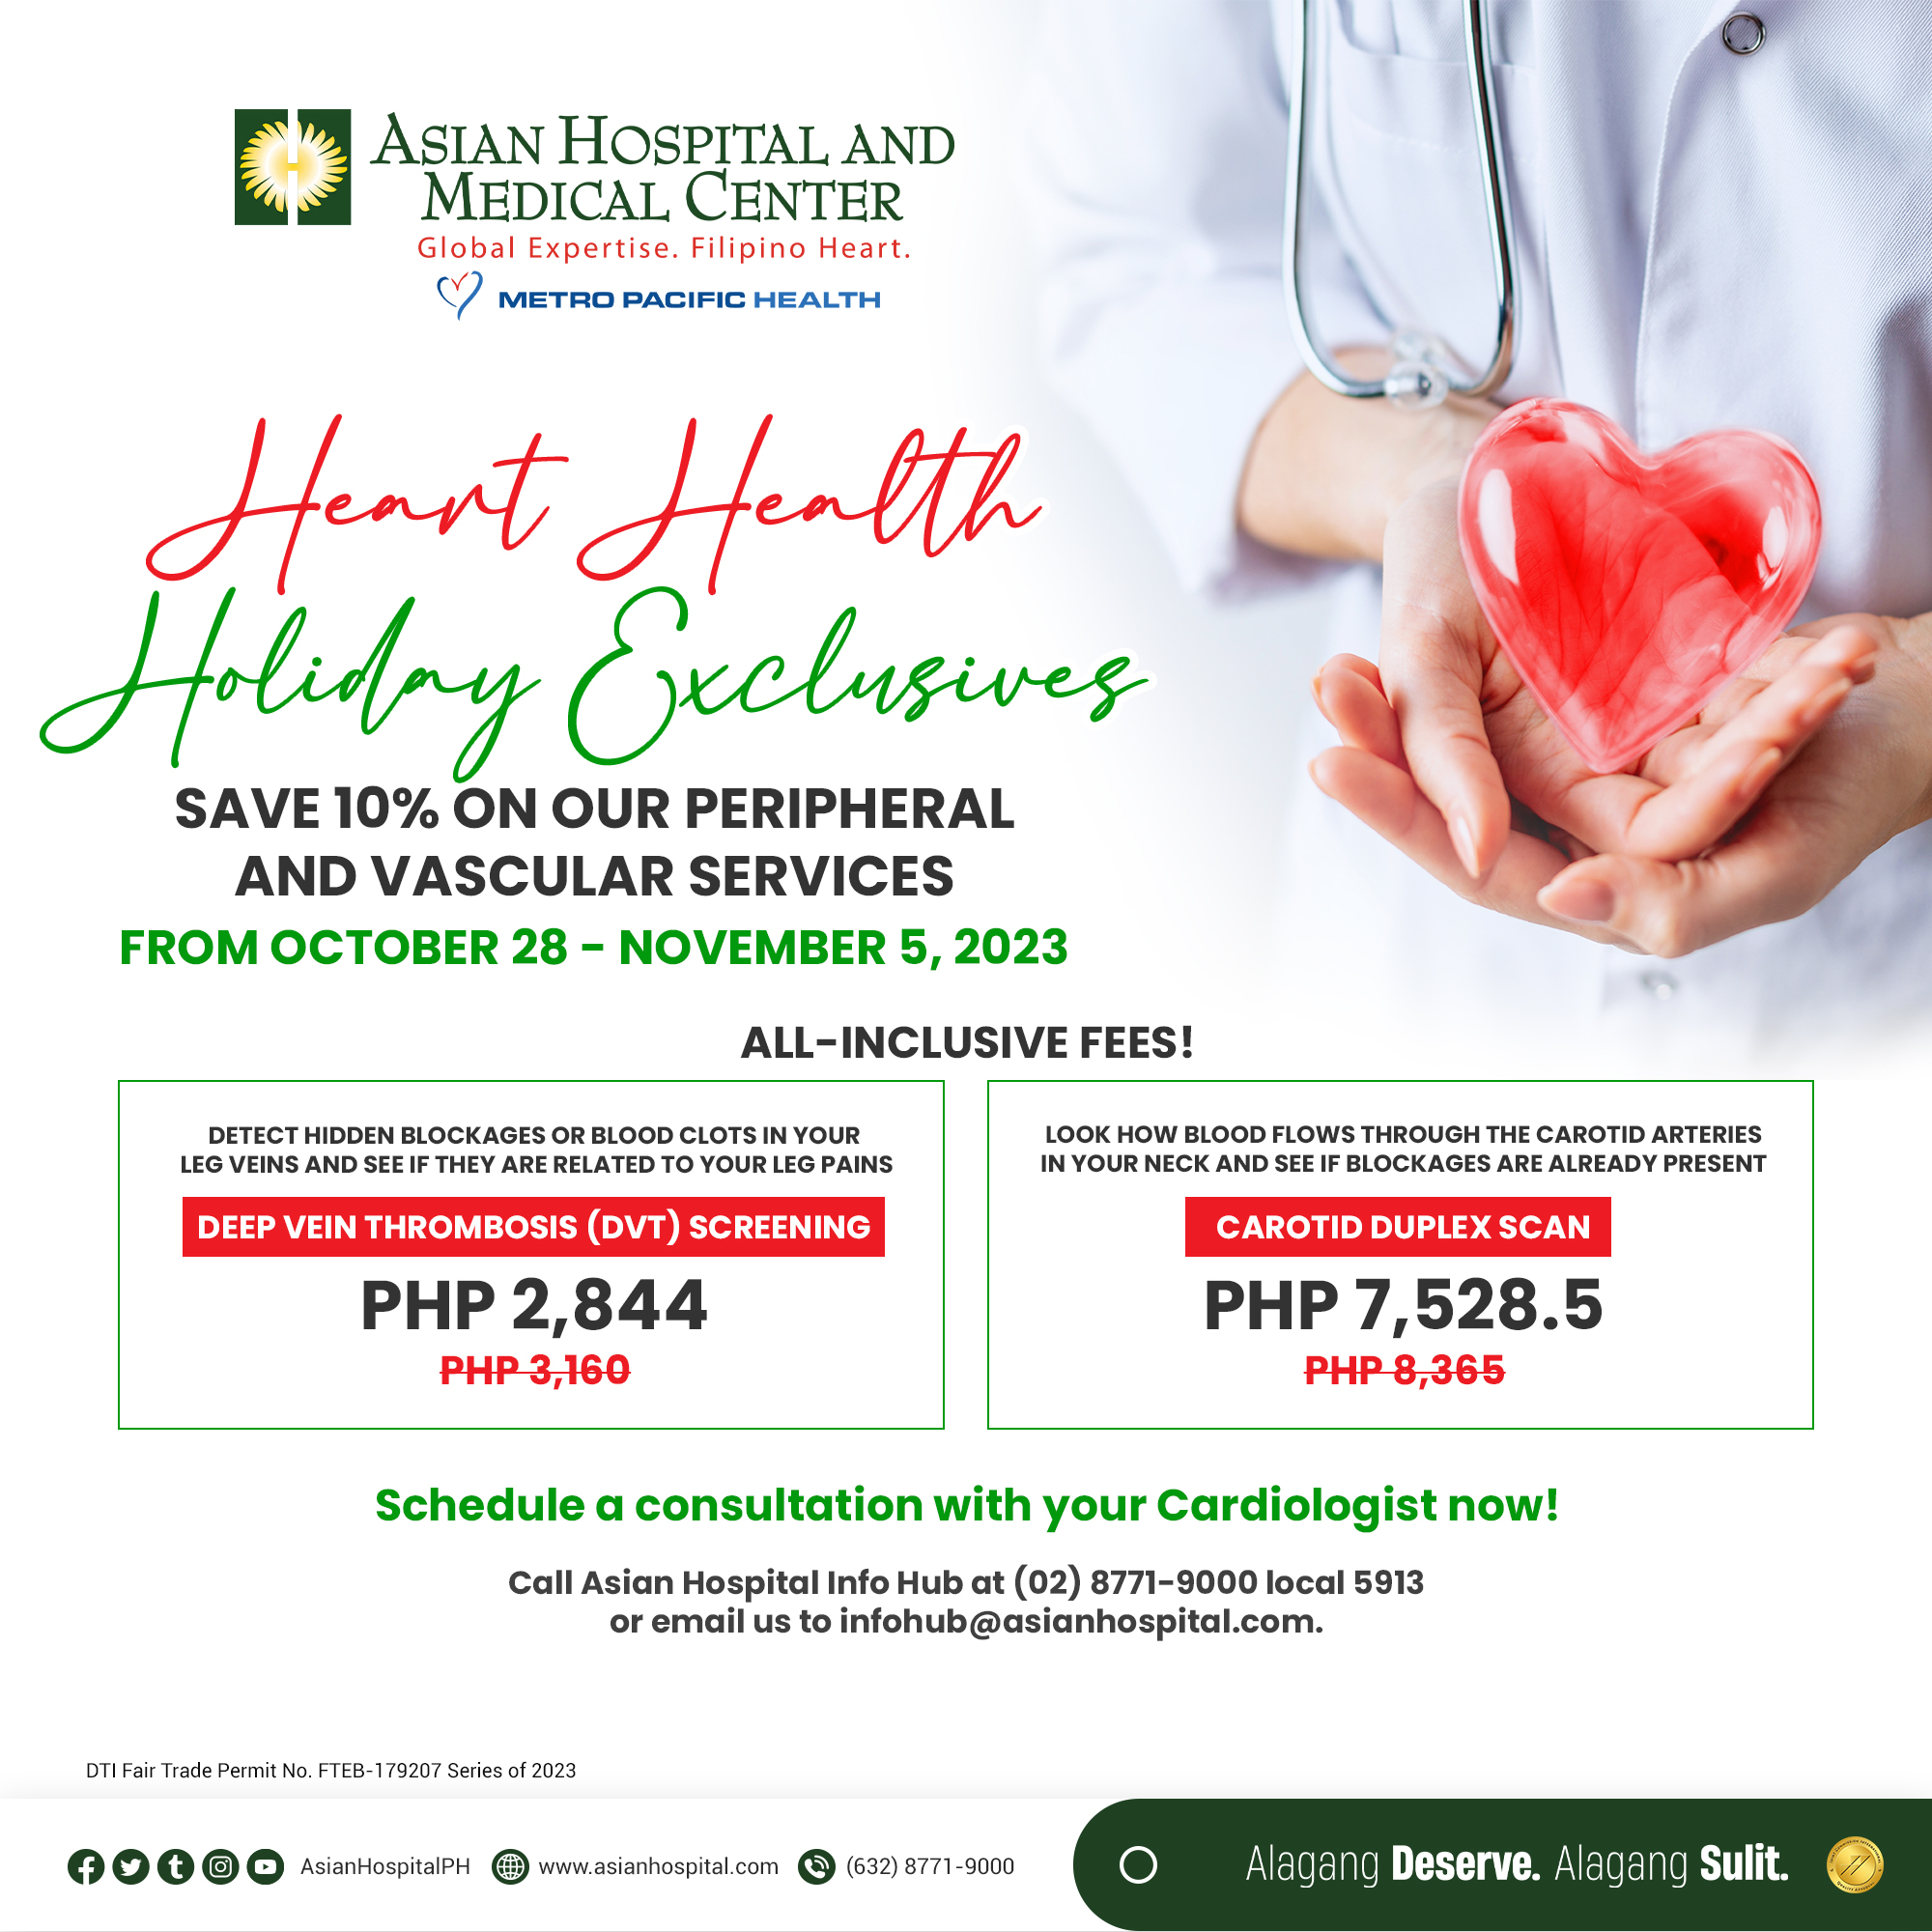 HEART HEALTH HOLIDAY EXCLUSIVES